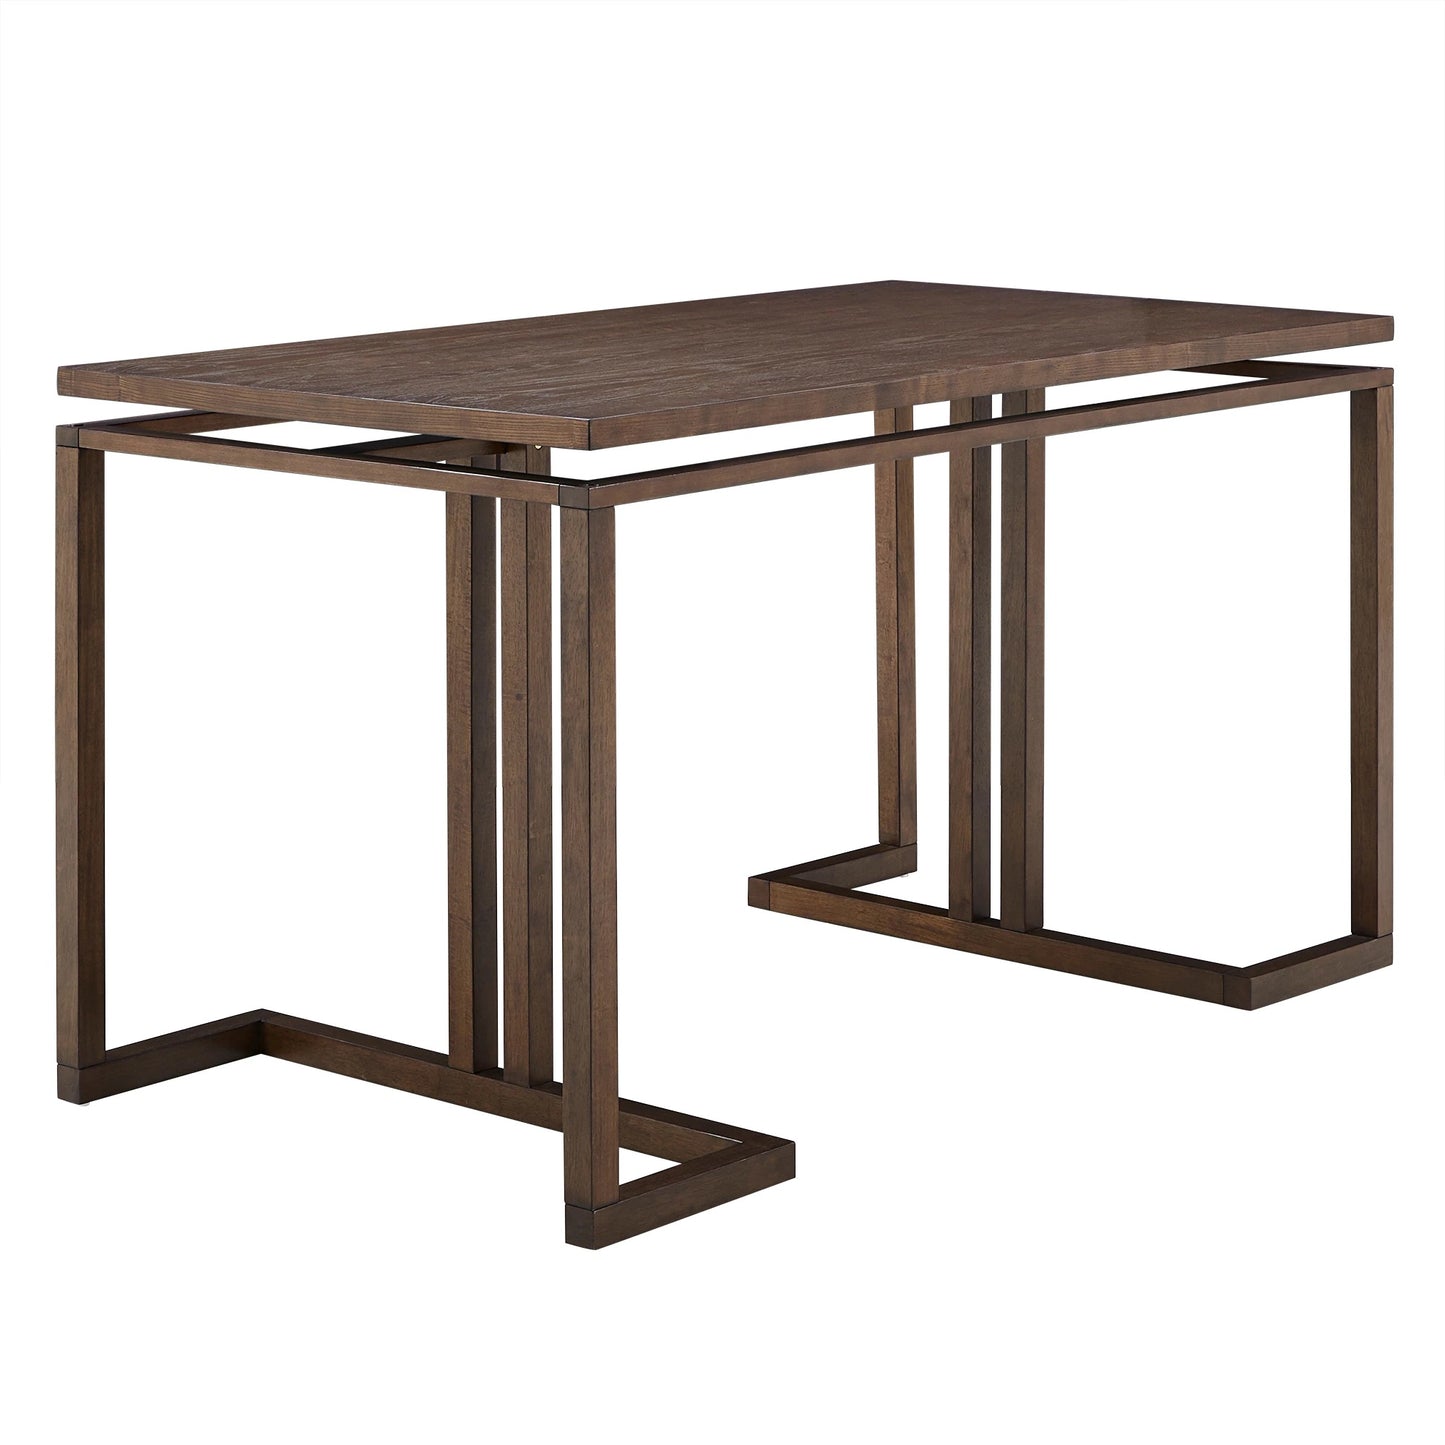 Rectangular Counter Height Dining Table - With Wine and Storage Cabinets